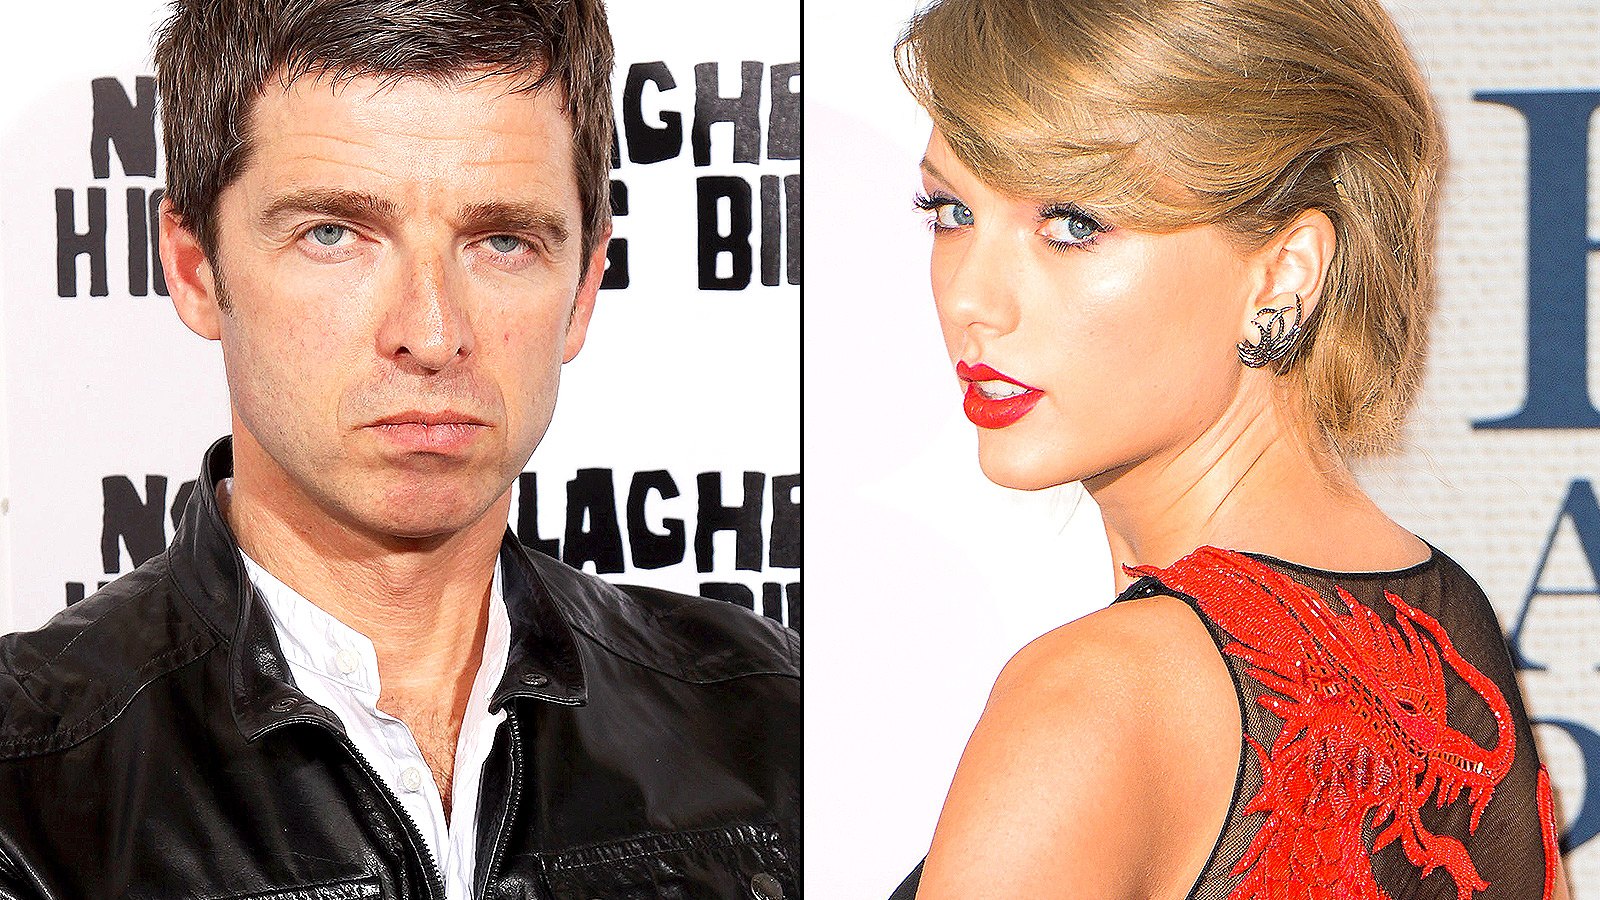 Noel Gallagher and Taylor swift